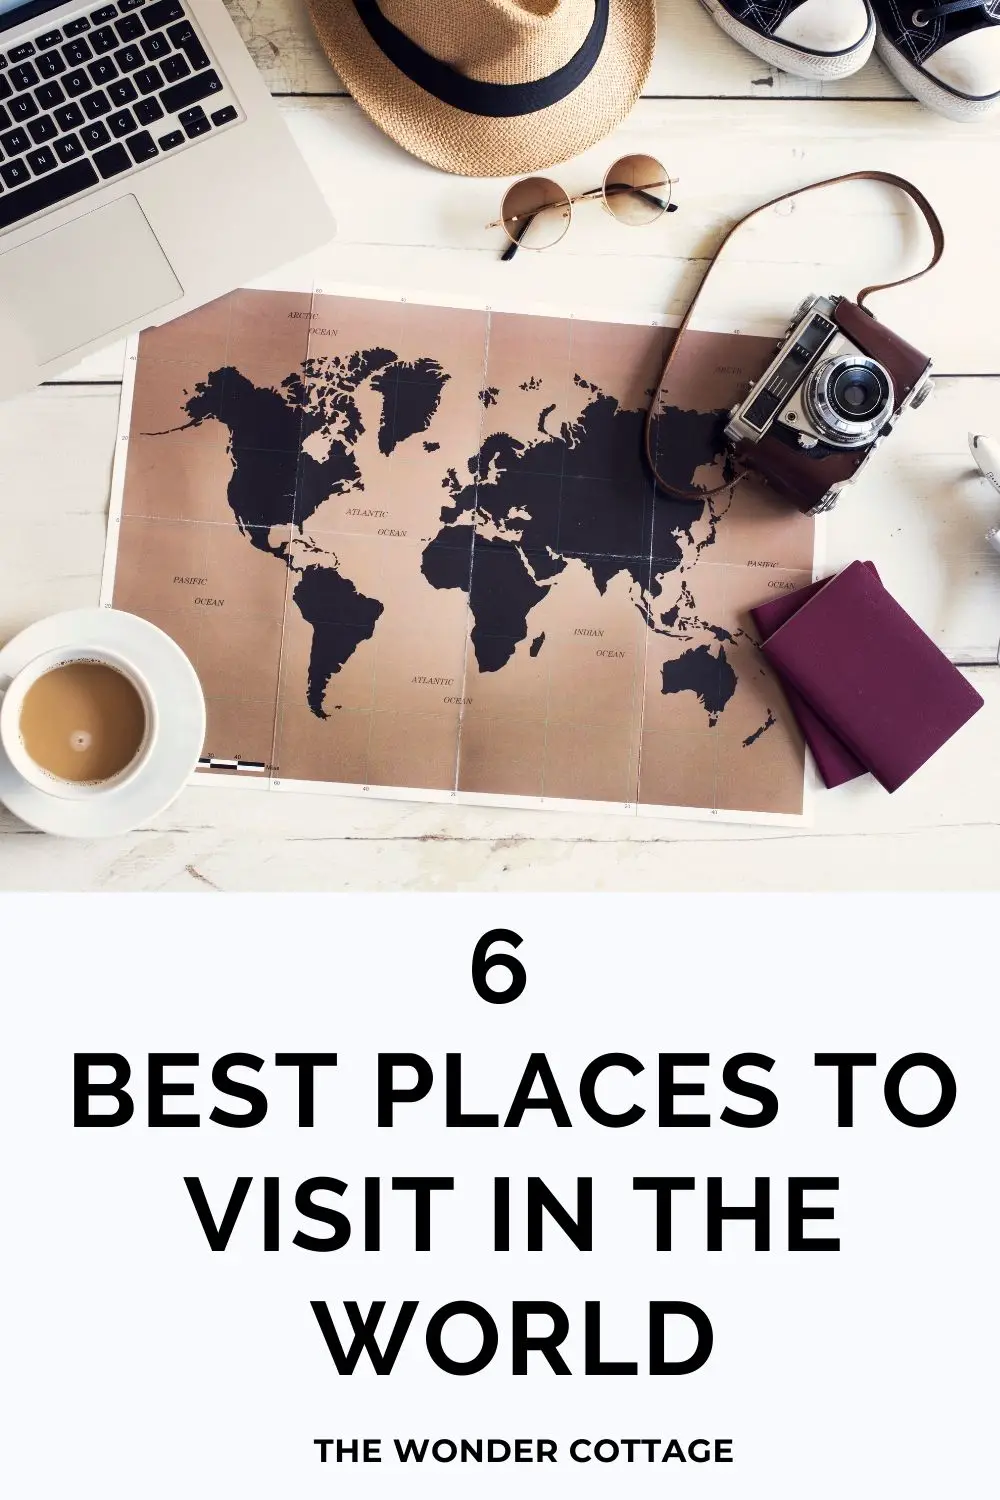 6 best places to visit in the world